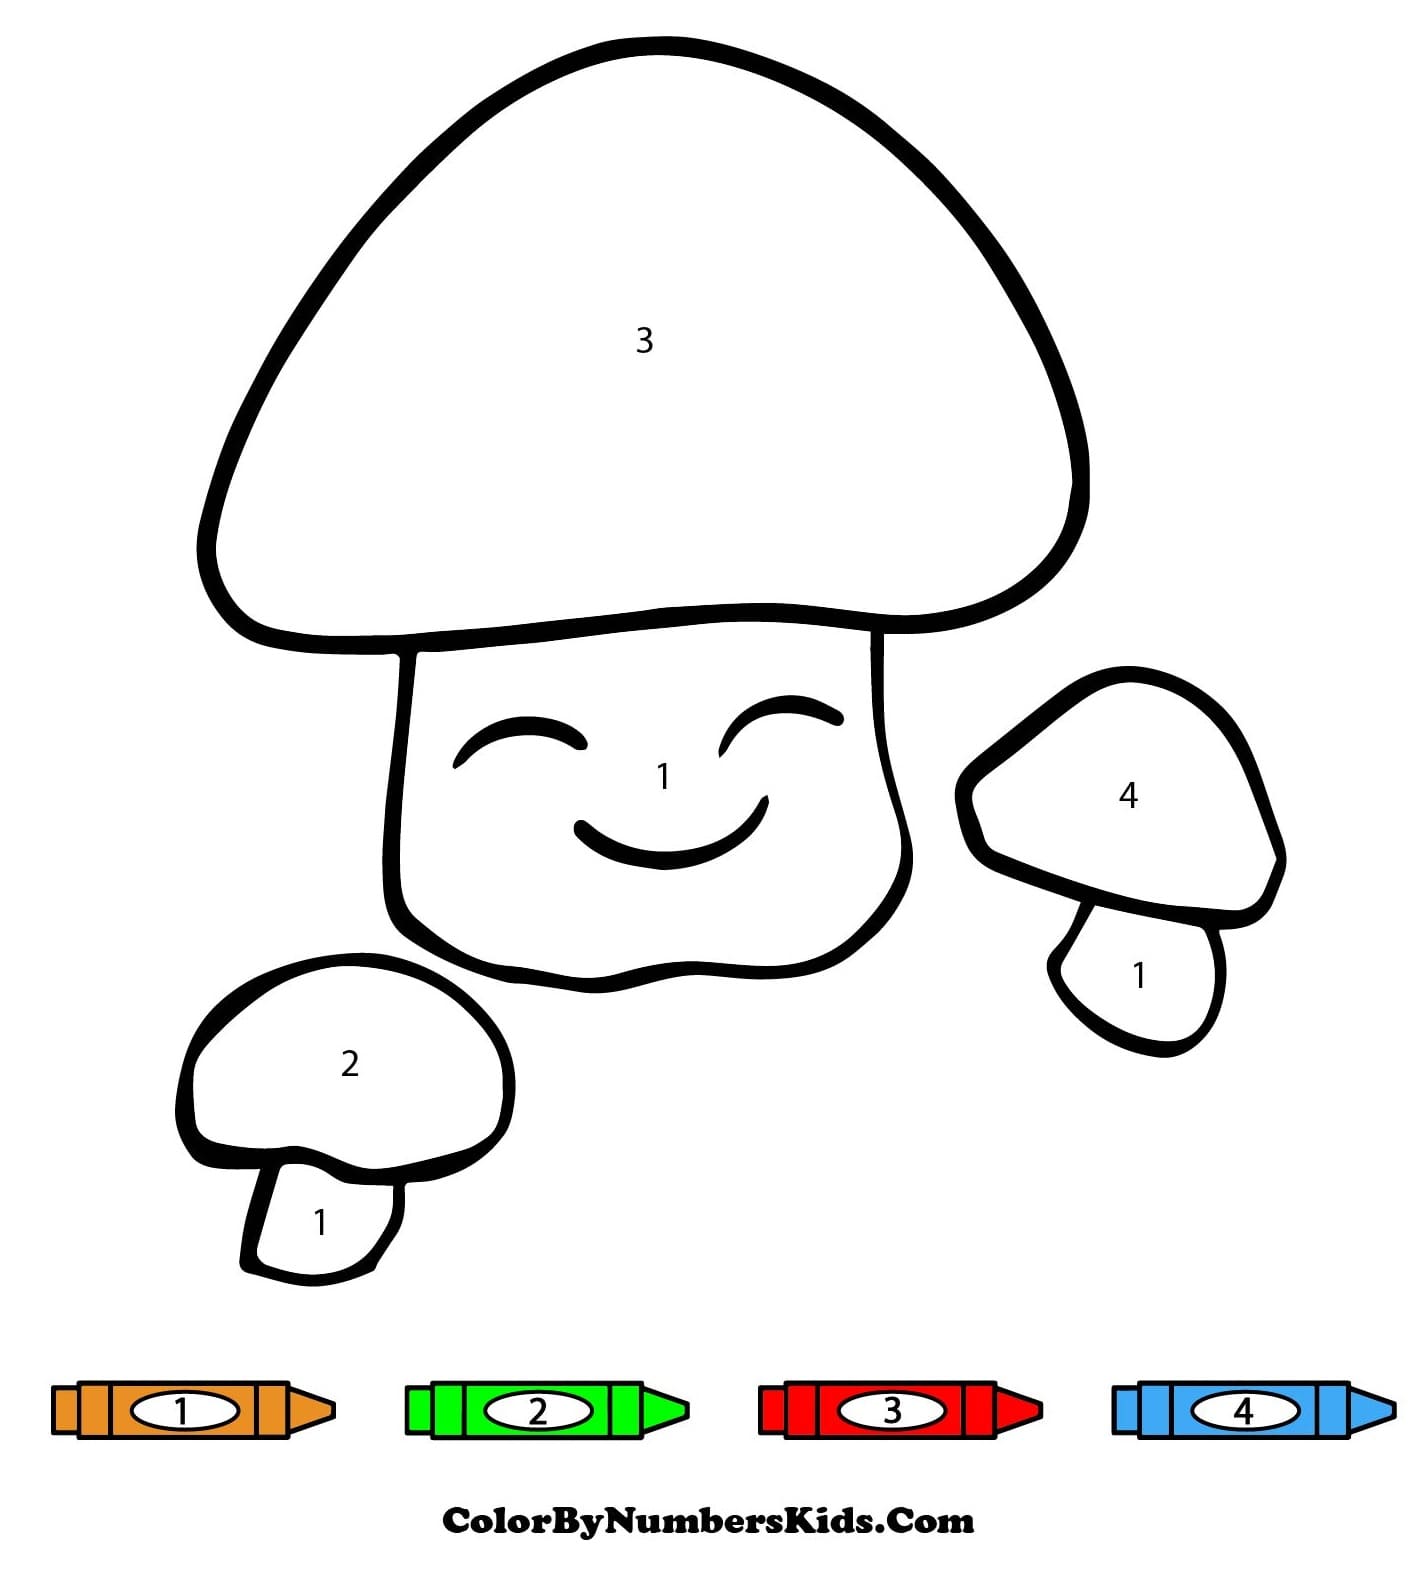 Mushroom Family Color By Number